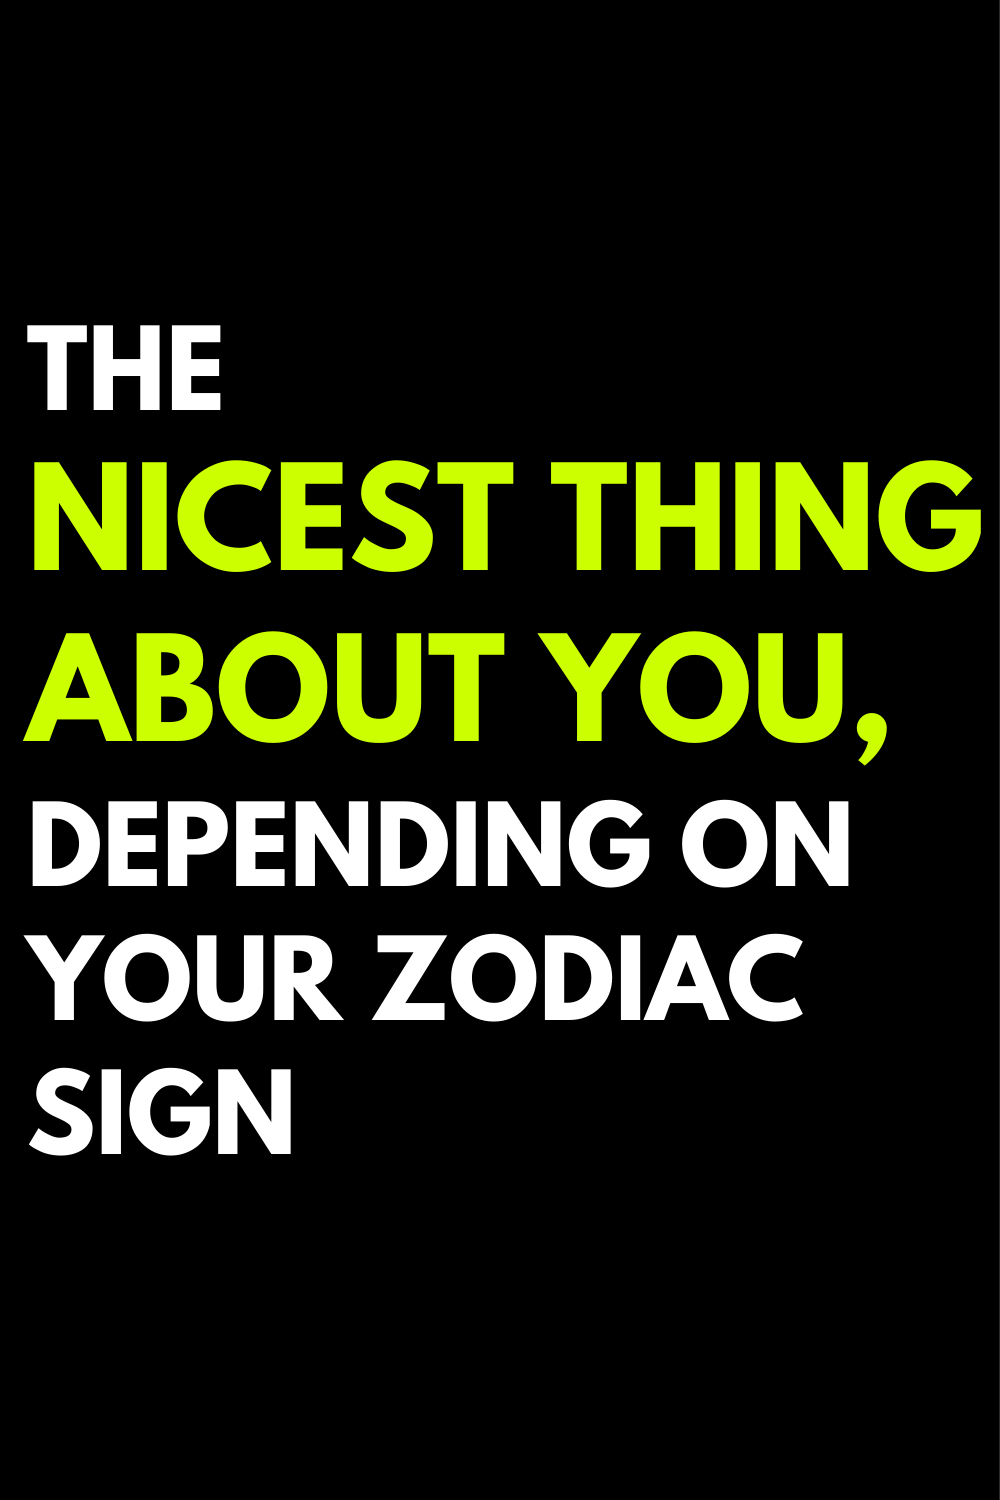 The nicest thing about you, depending on your zodiac sign